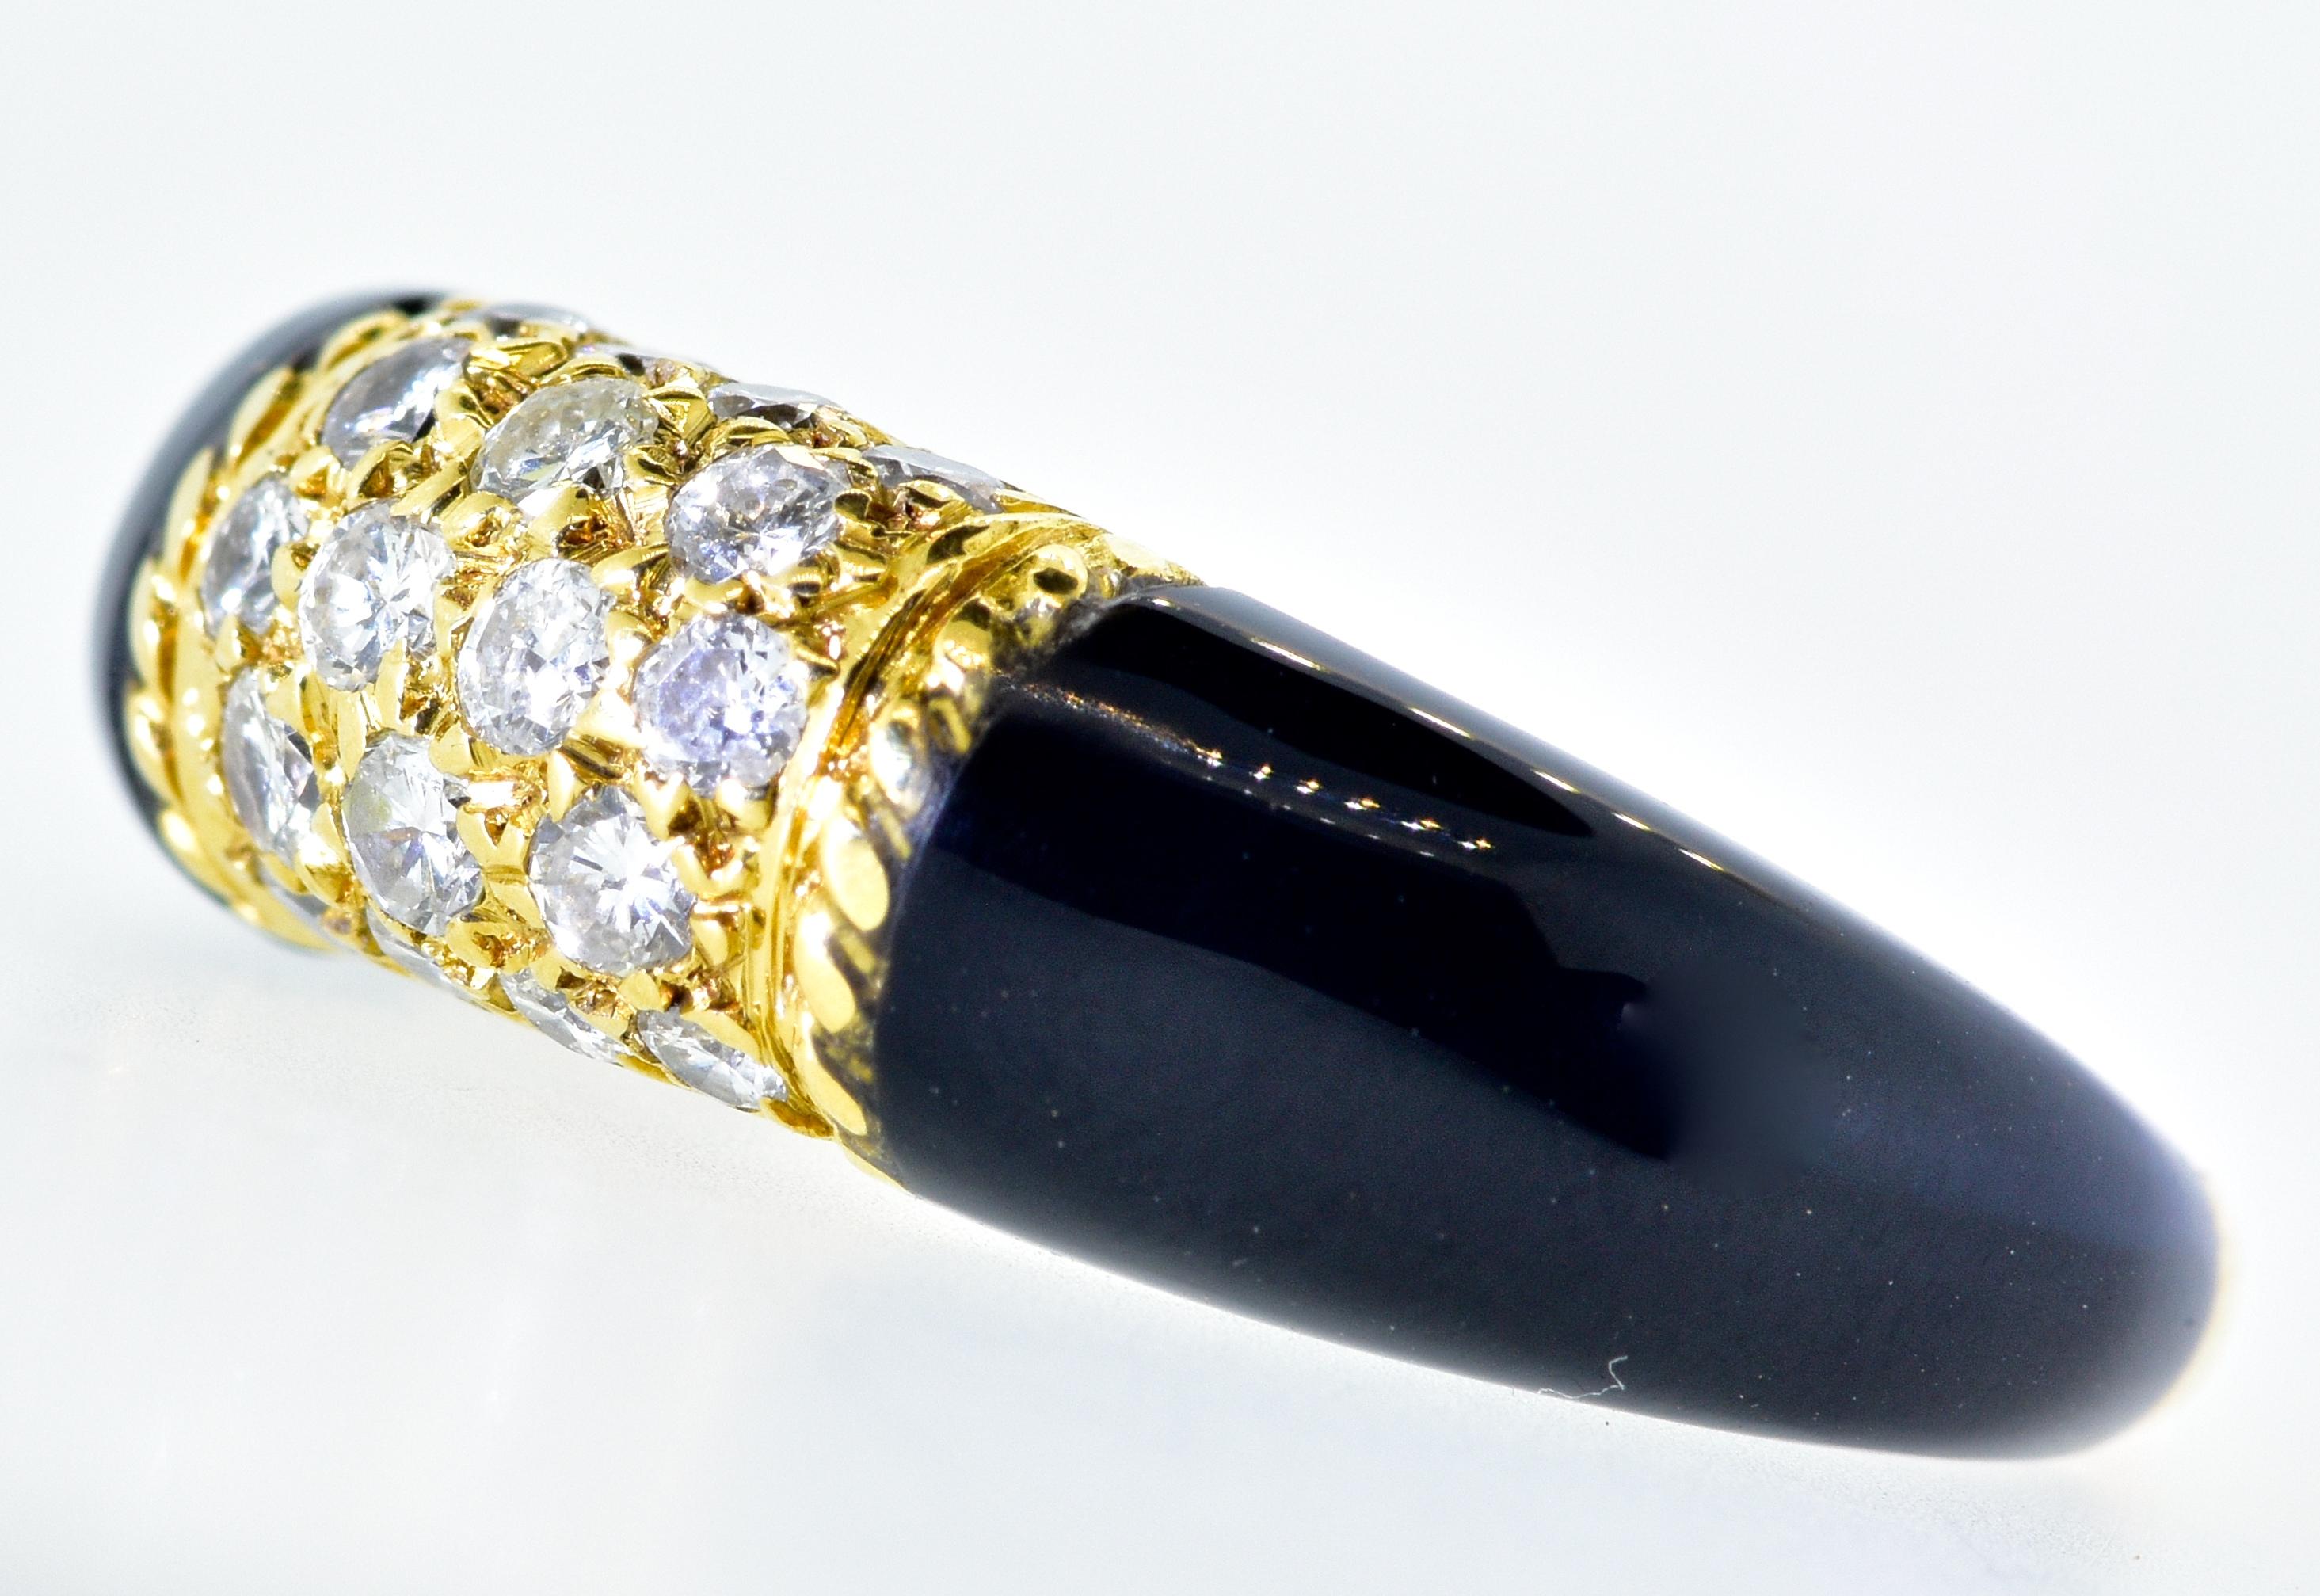 Van Cleef & Arpels, signed and numbered, this charming ring possesses fine white diamonds set into 18K gold and with fancy cut onyx shoulders.  This ring is in fine condition, it is small - a size 3.5, and can be sized slightly.